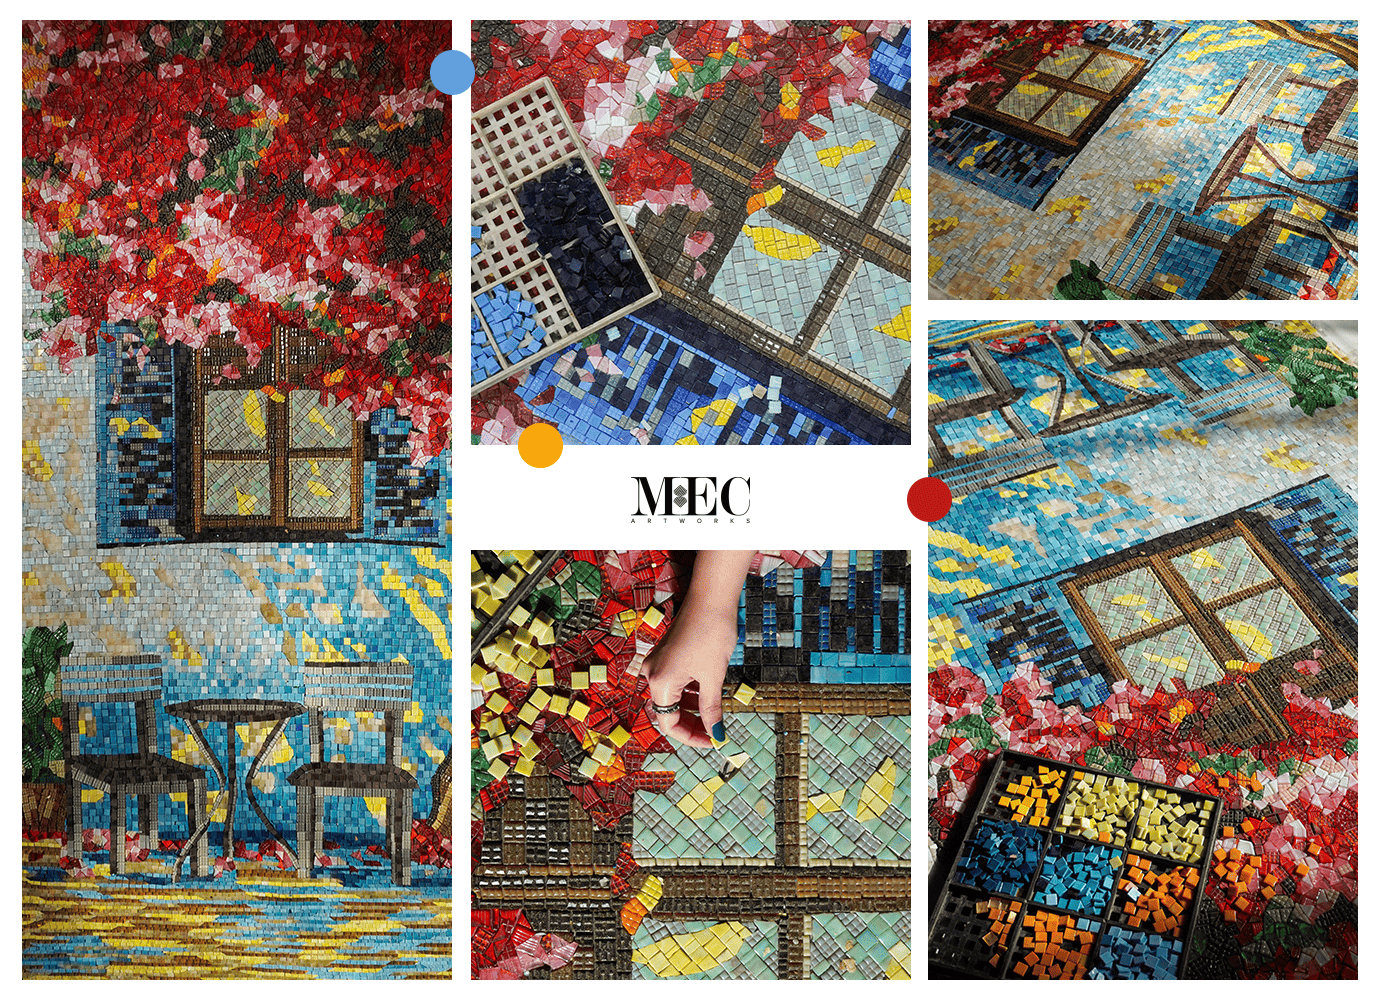 painting inspired handcrafted mosaic animals, elephants and scenery. Monochrome image with some colorful Murano glass details.